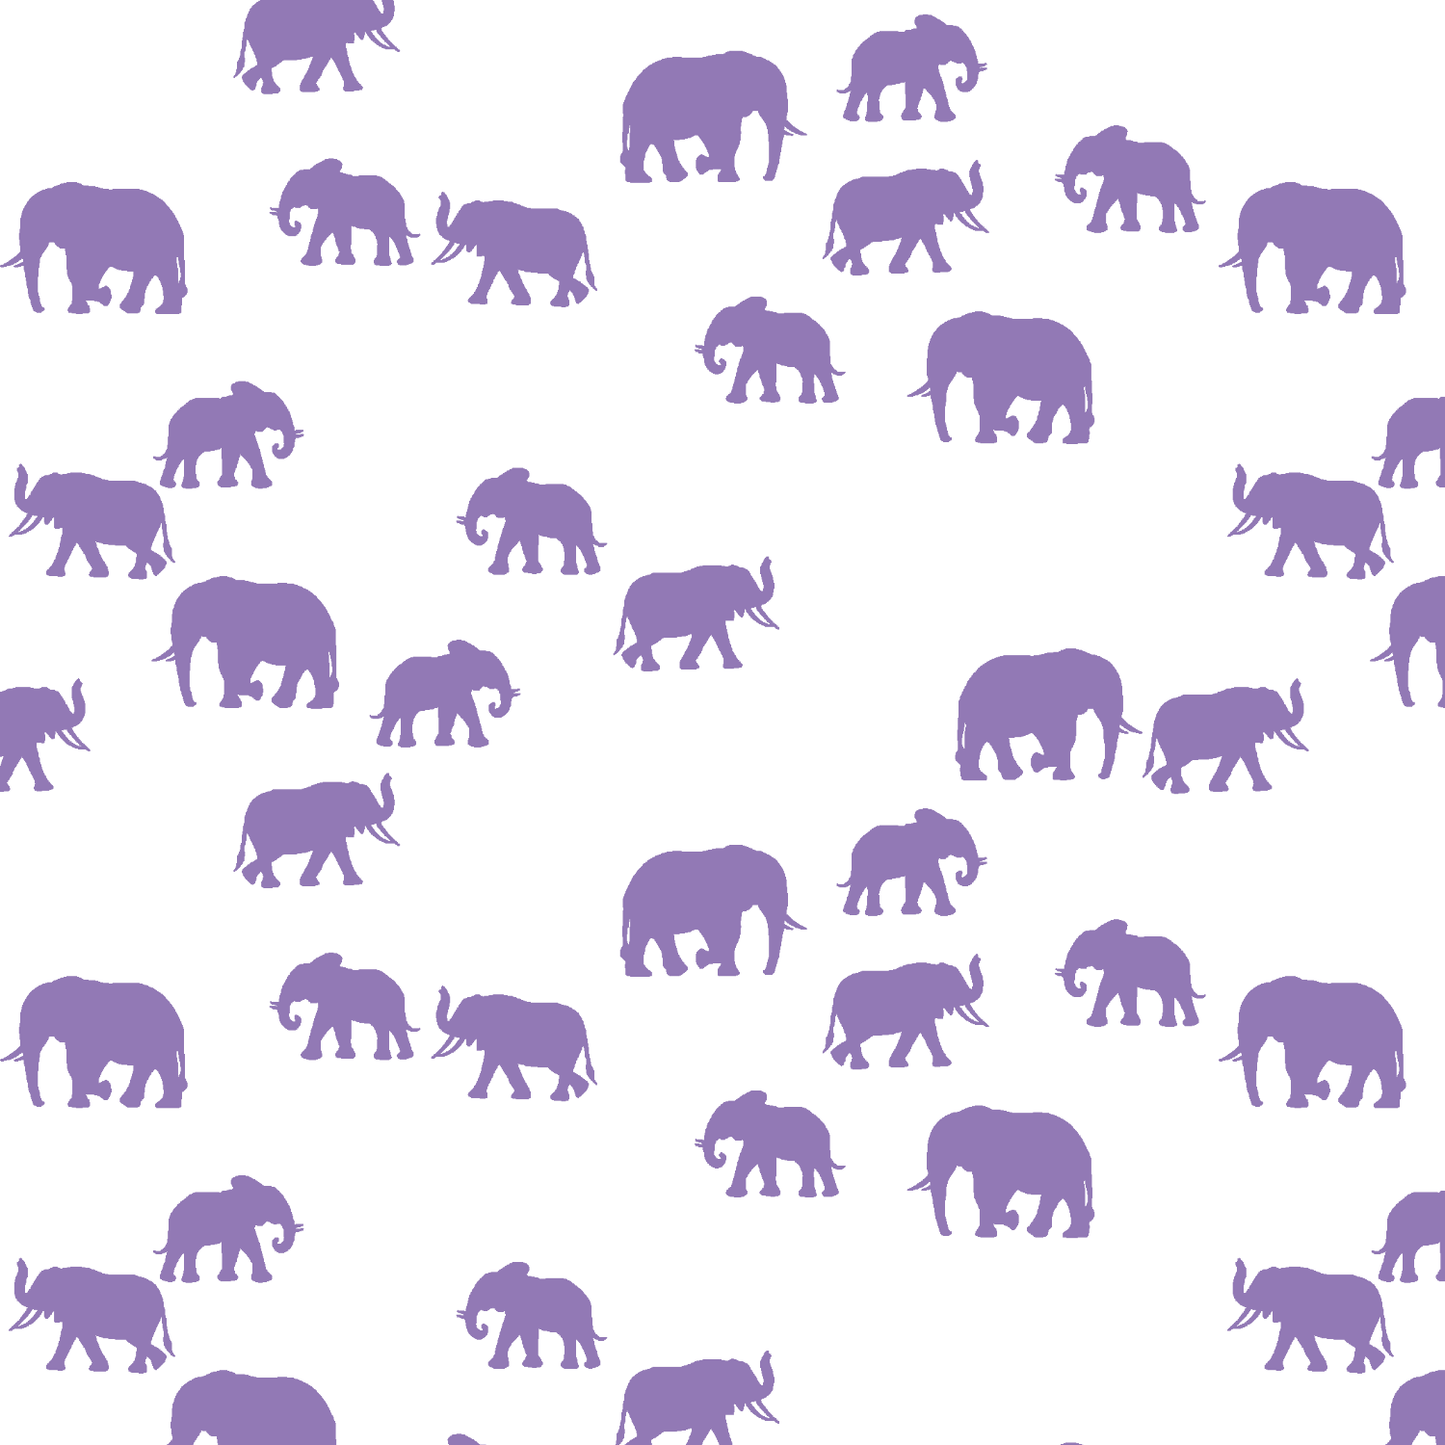 Elephant Silhouette in Amethyst on White